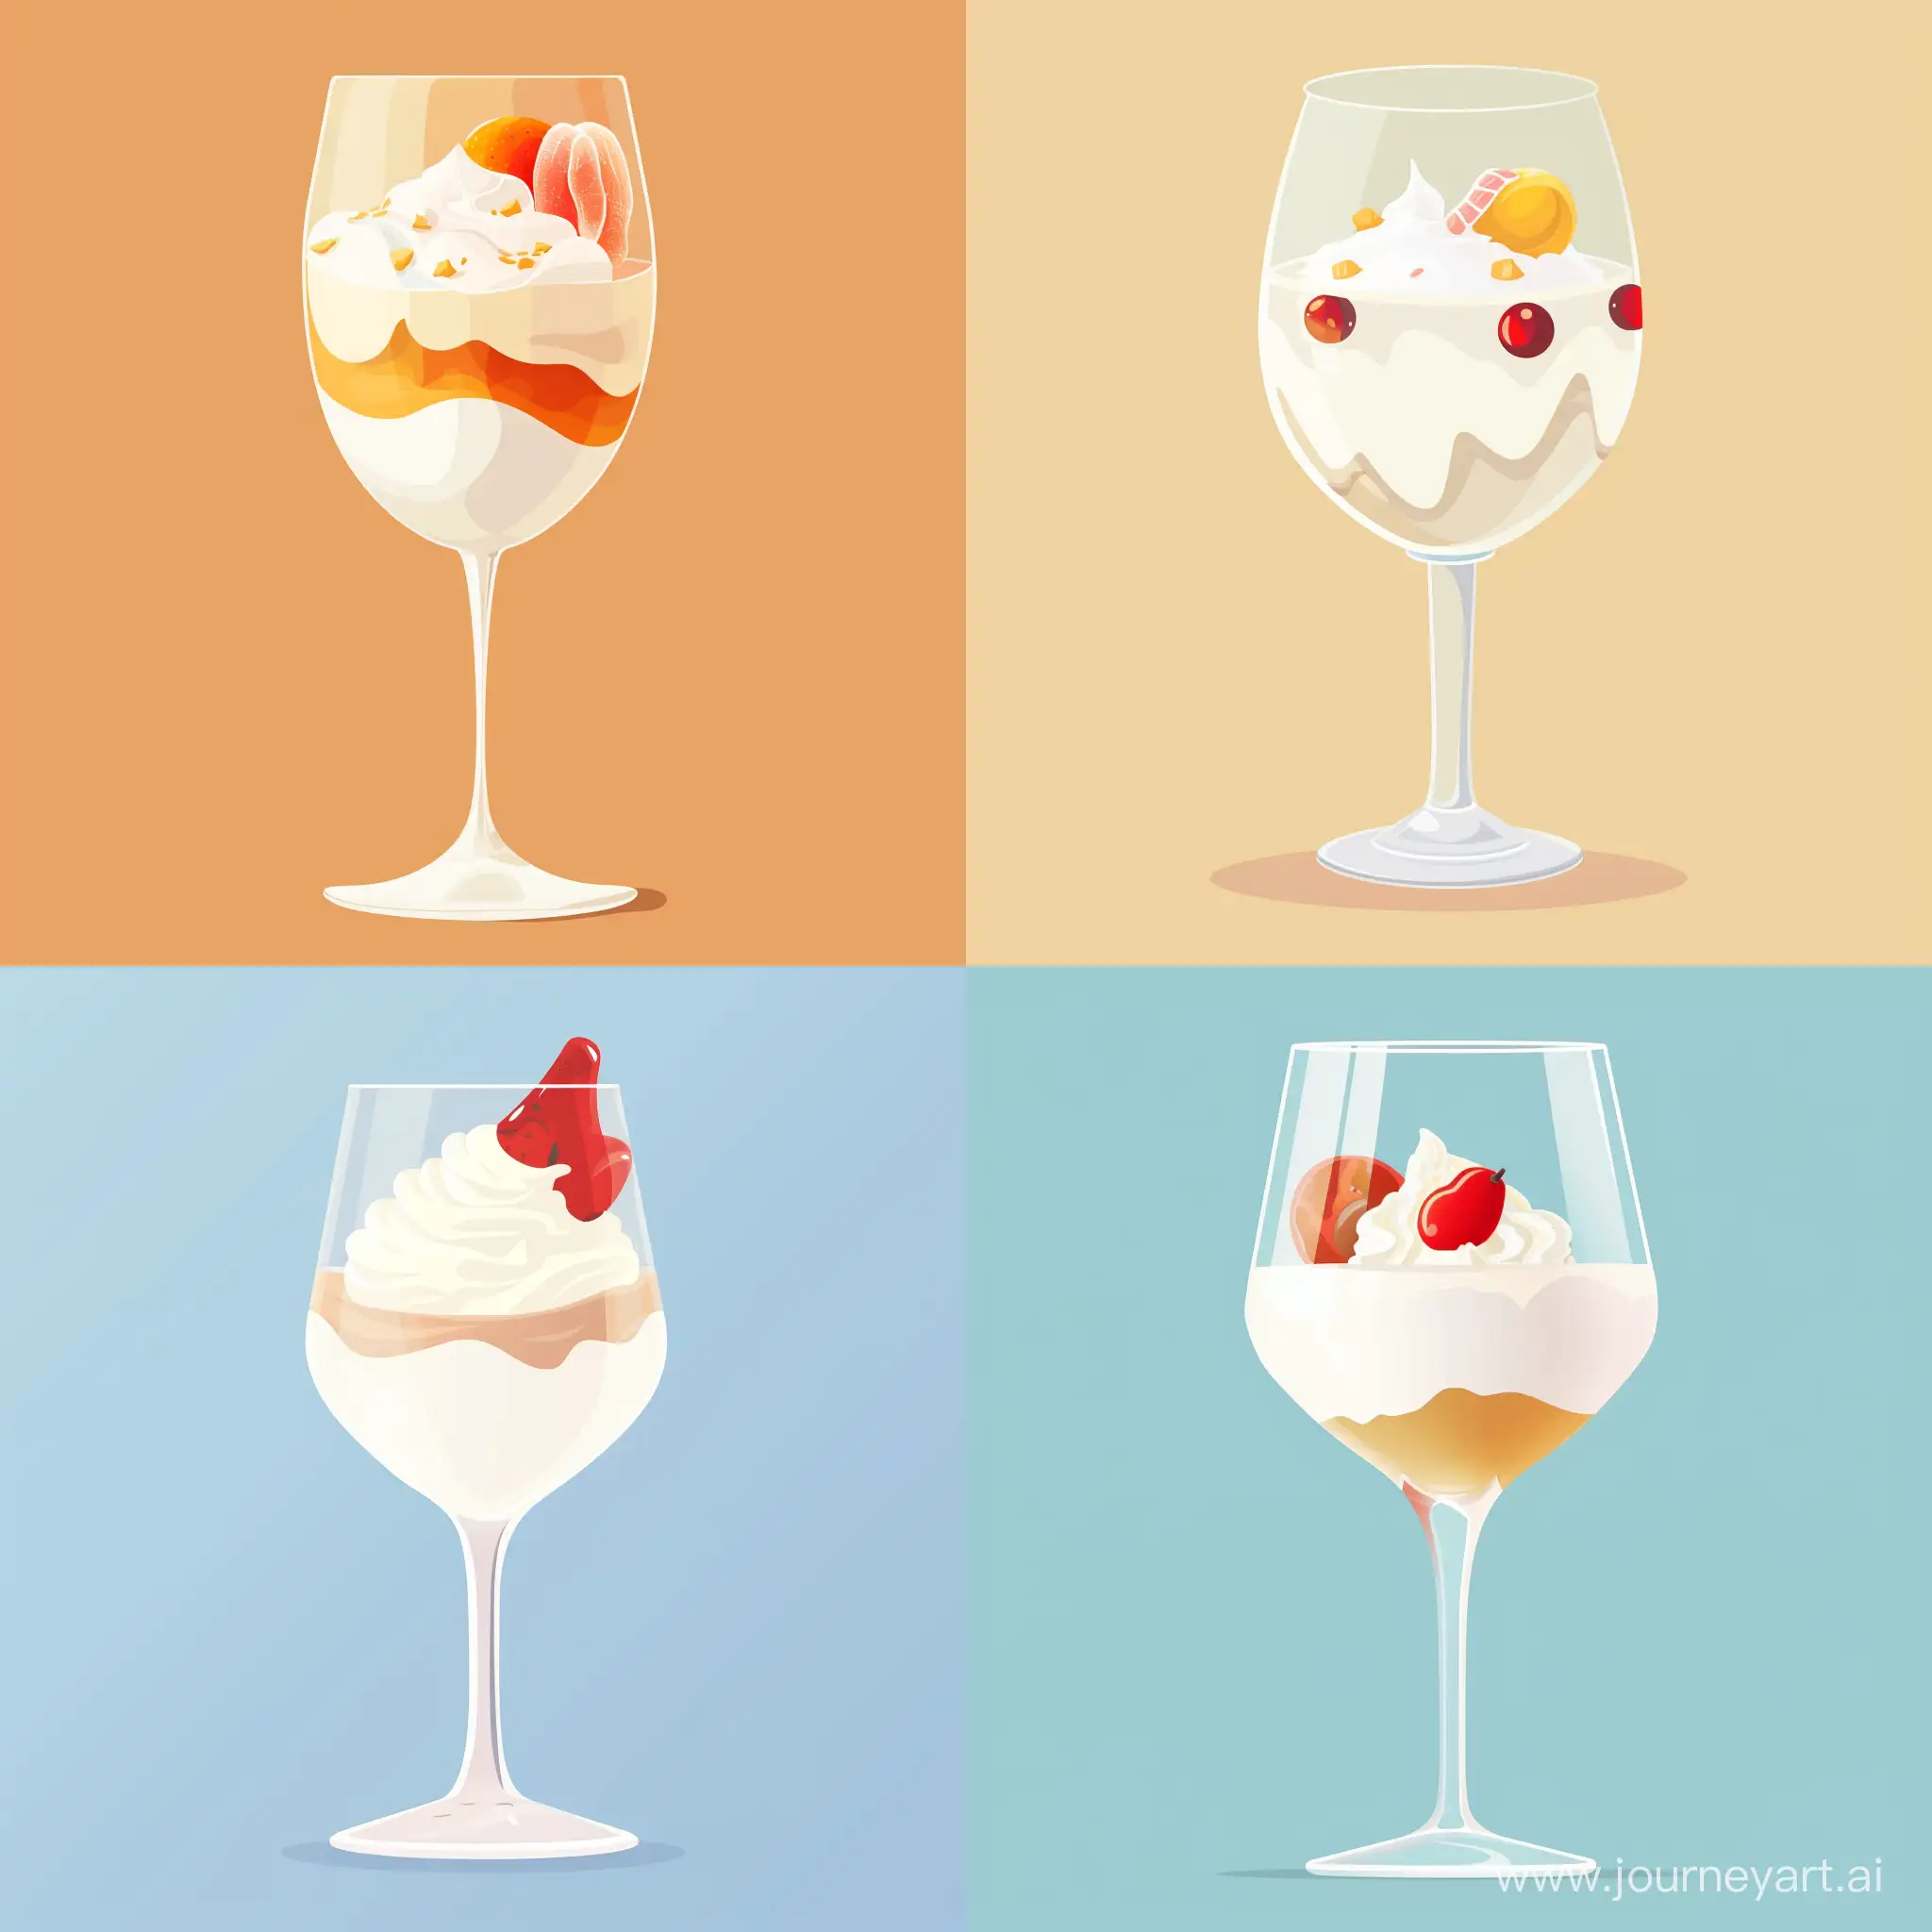 Close up of a wine glass of milk inside with whipped cream on it and a candied fruit, in flat style